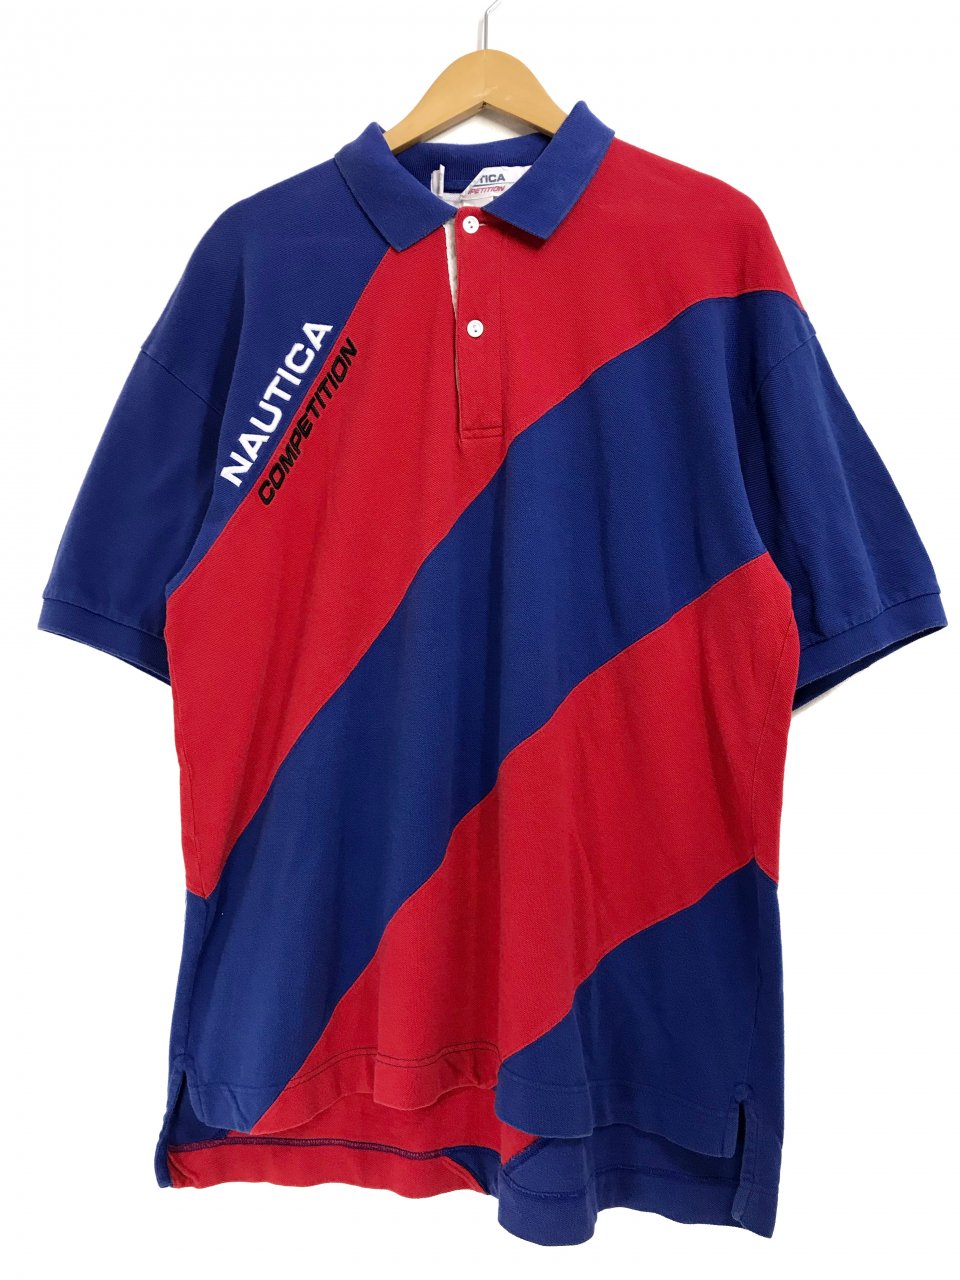 USA製 90s NAUTICA COMPETITION Switching S/S Polo Shirts 青赤 XL ノーティカ コンペティション  斜め切り替え 半袖 ポロシャツ トリコロール - NEWJOKE ONLINE STORE